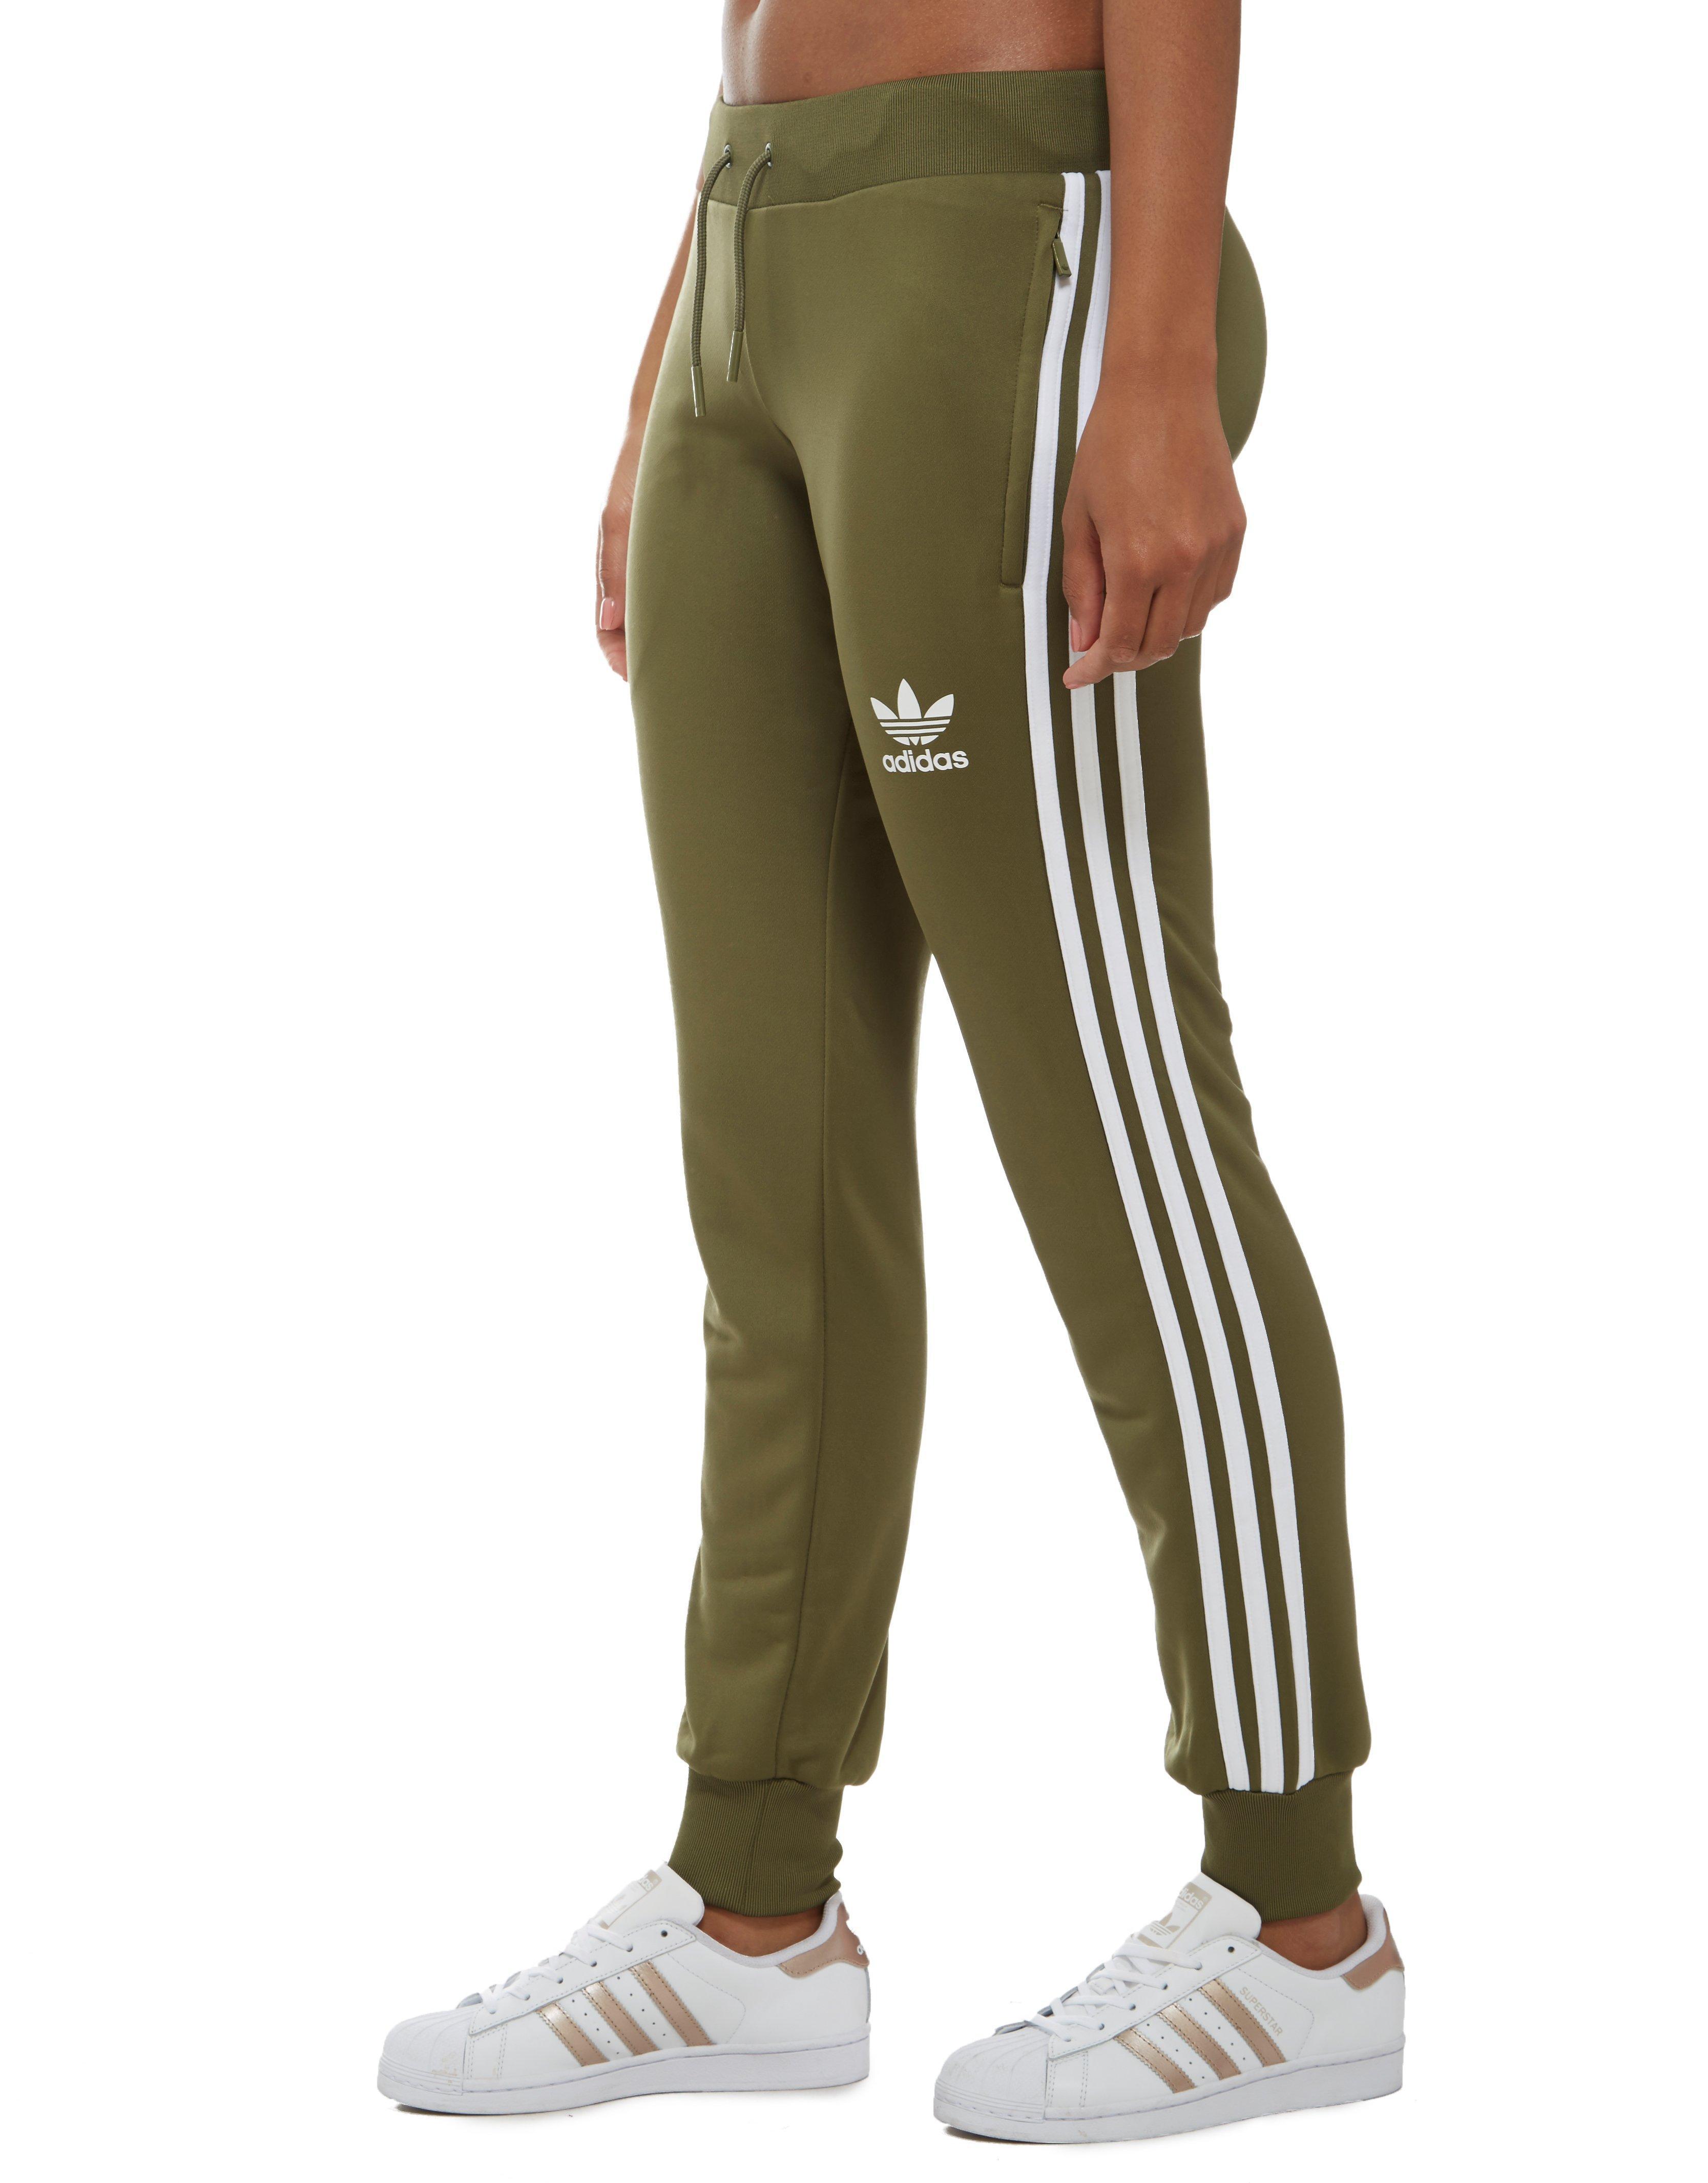 Buy > adidas track pants green stripes > in stock